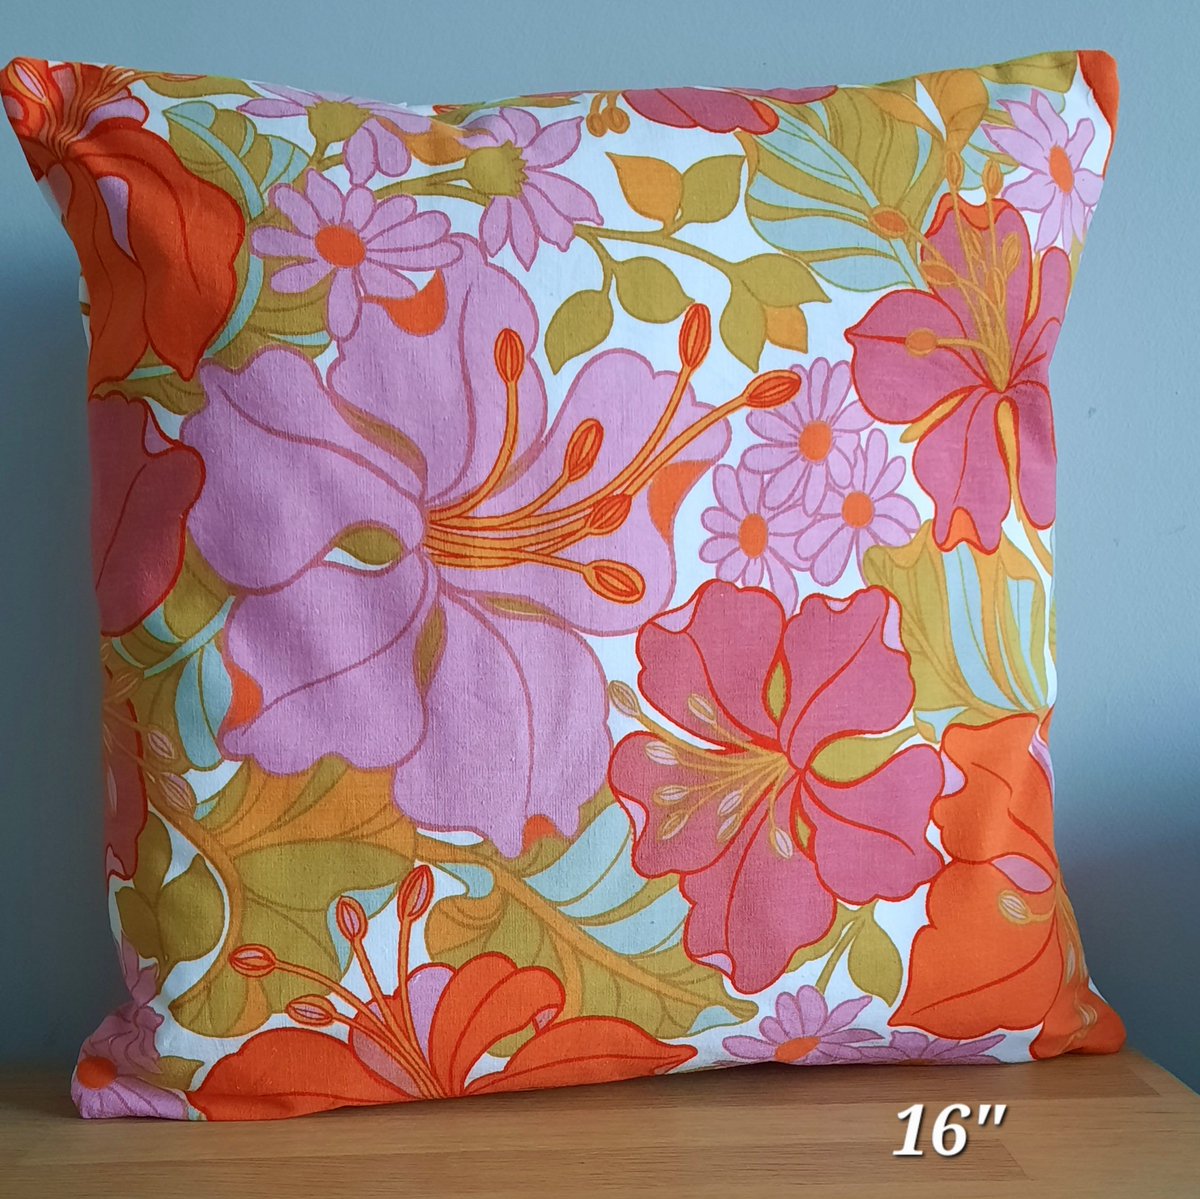 One of the many cushion covers I have available. 

Lots of colours & patterns to pick from

All vintage fabrics

Laracraftcreations.etsy.com 

#scottishcrafthour #handmadeinscotland #shopindie